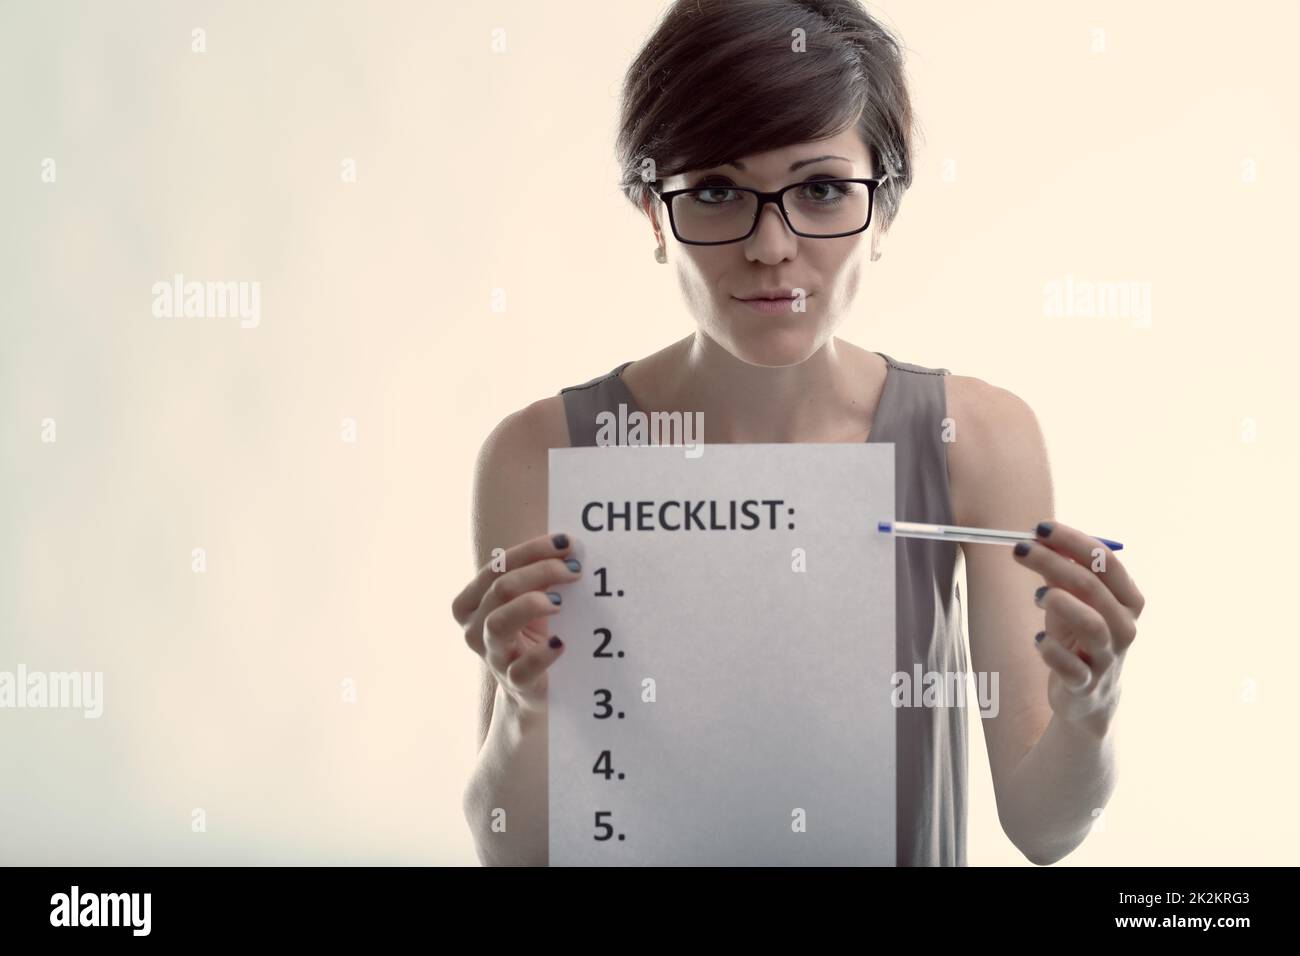 Earnest woman wearing glasses pointing to a blank checklist Stock Photo